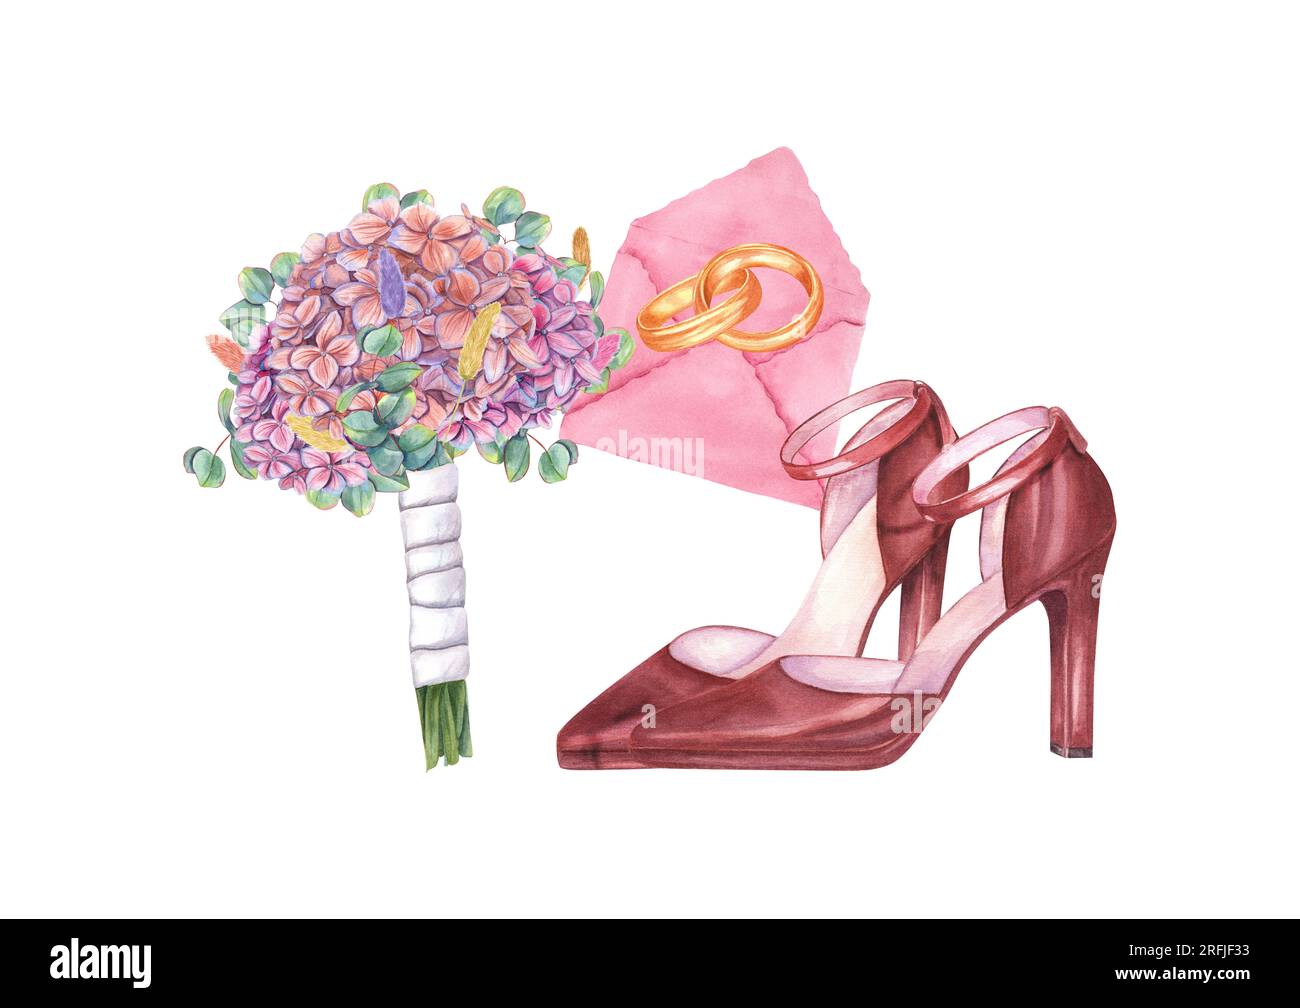 Wedding composition with gold rings, pink envelope, bridal bouquet and shoes. Female high-heeled shoes. Wedding rings. Bouquet with hydrangea Stock Photo